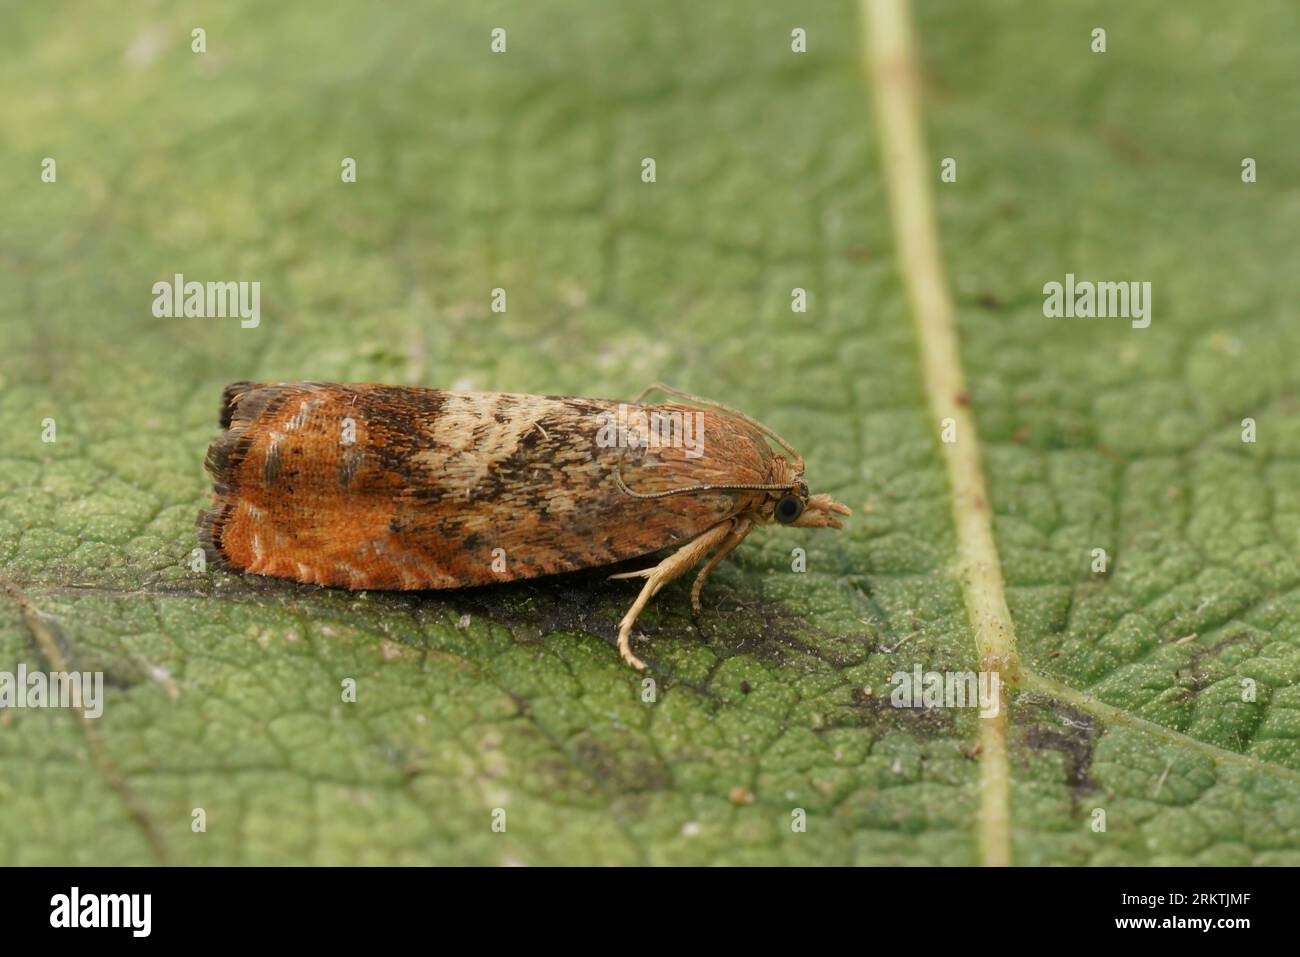 Colorful detailed closeup on the the rusty oak tortricid moth, Cydia amplana , sitting on a green leaf Stock Photo